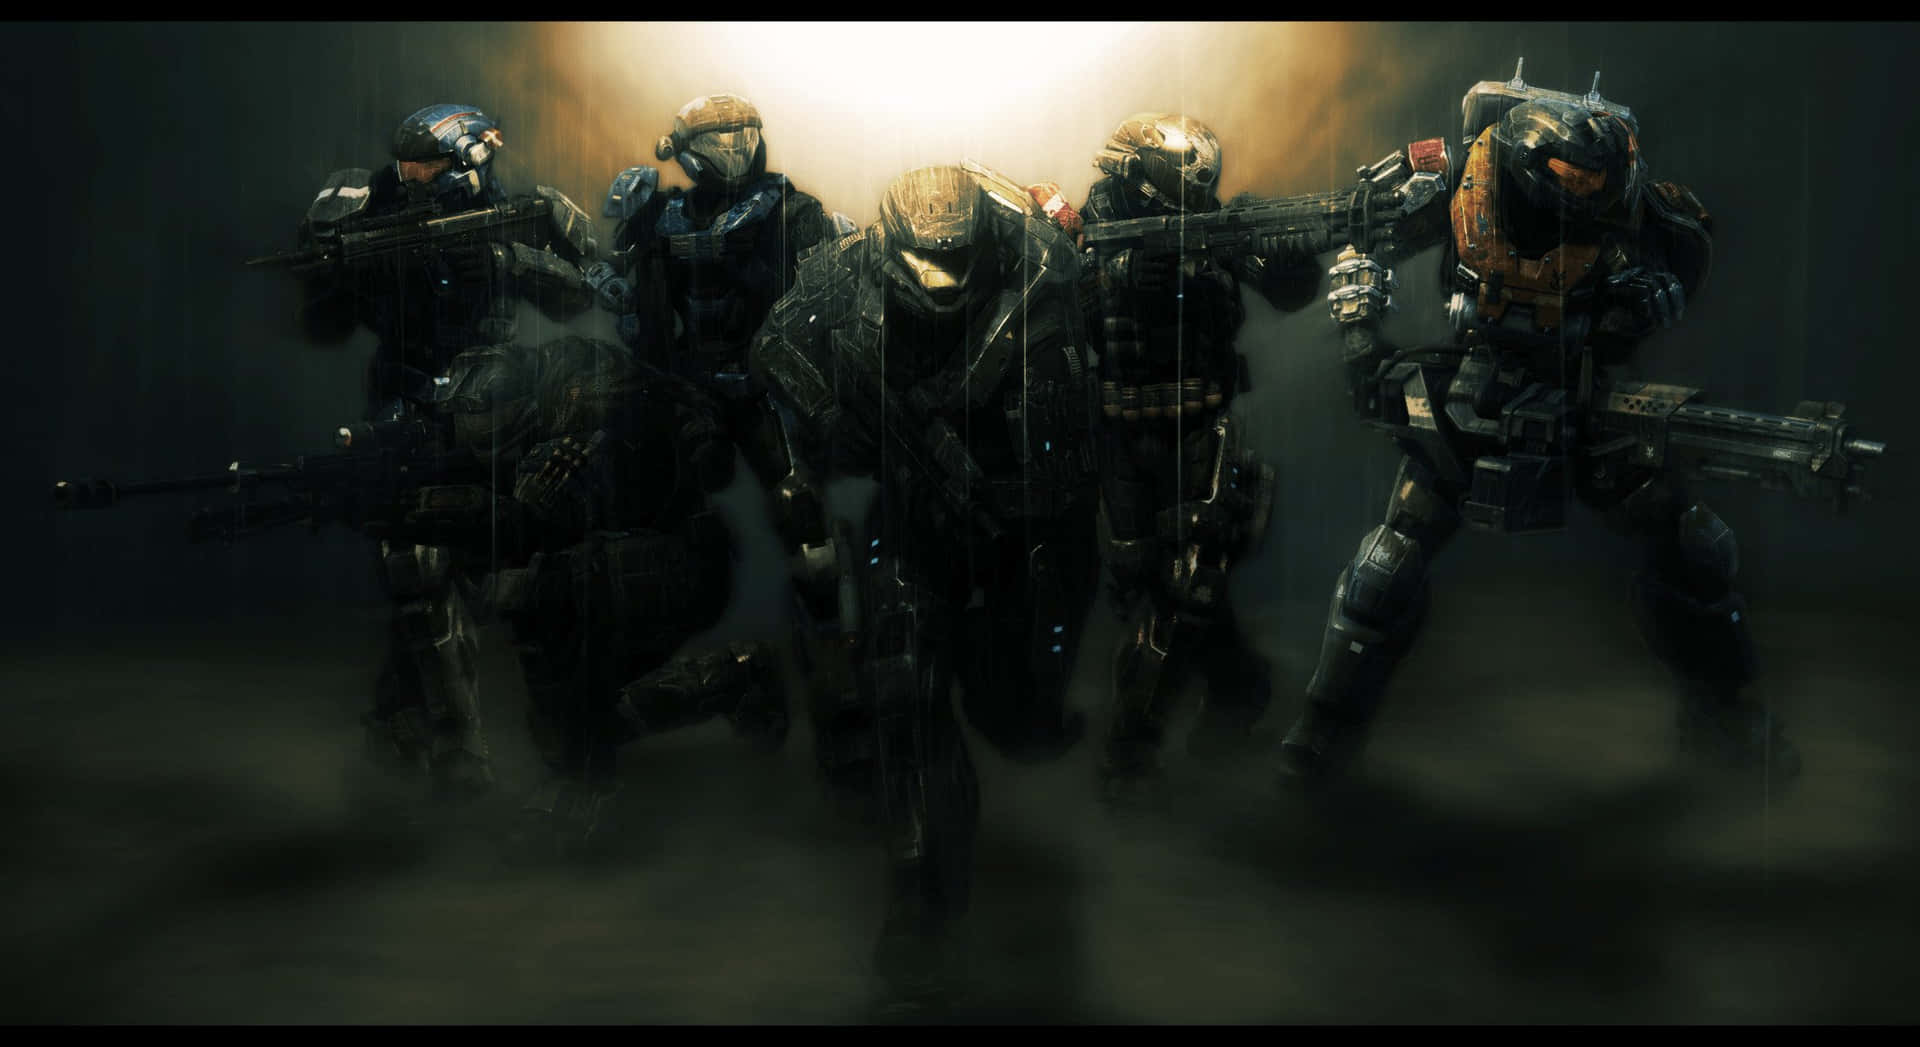 A fierce group of Halo Spartans ready for battle Wallpaper